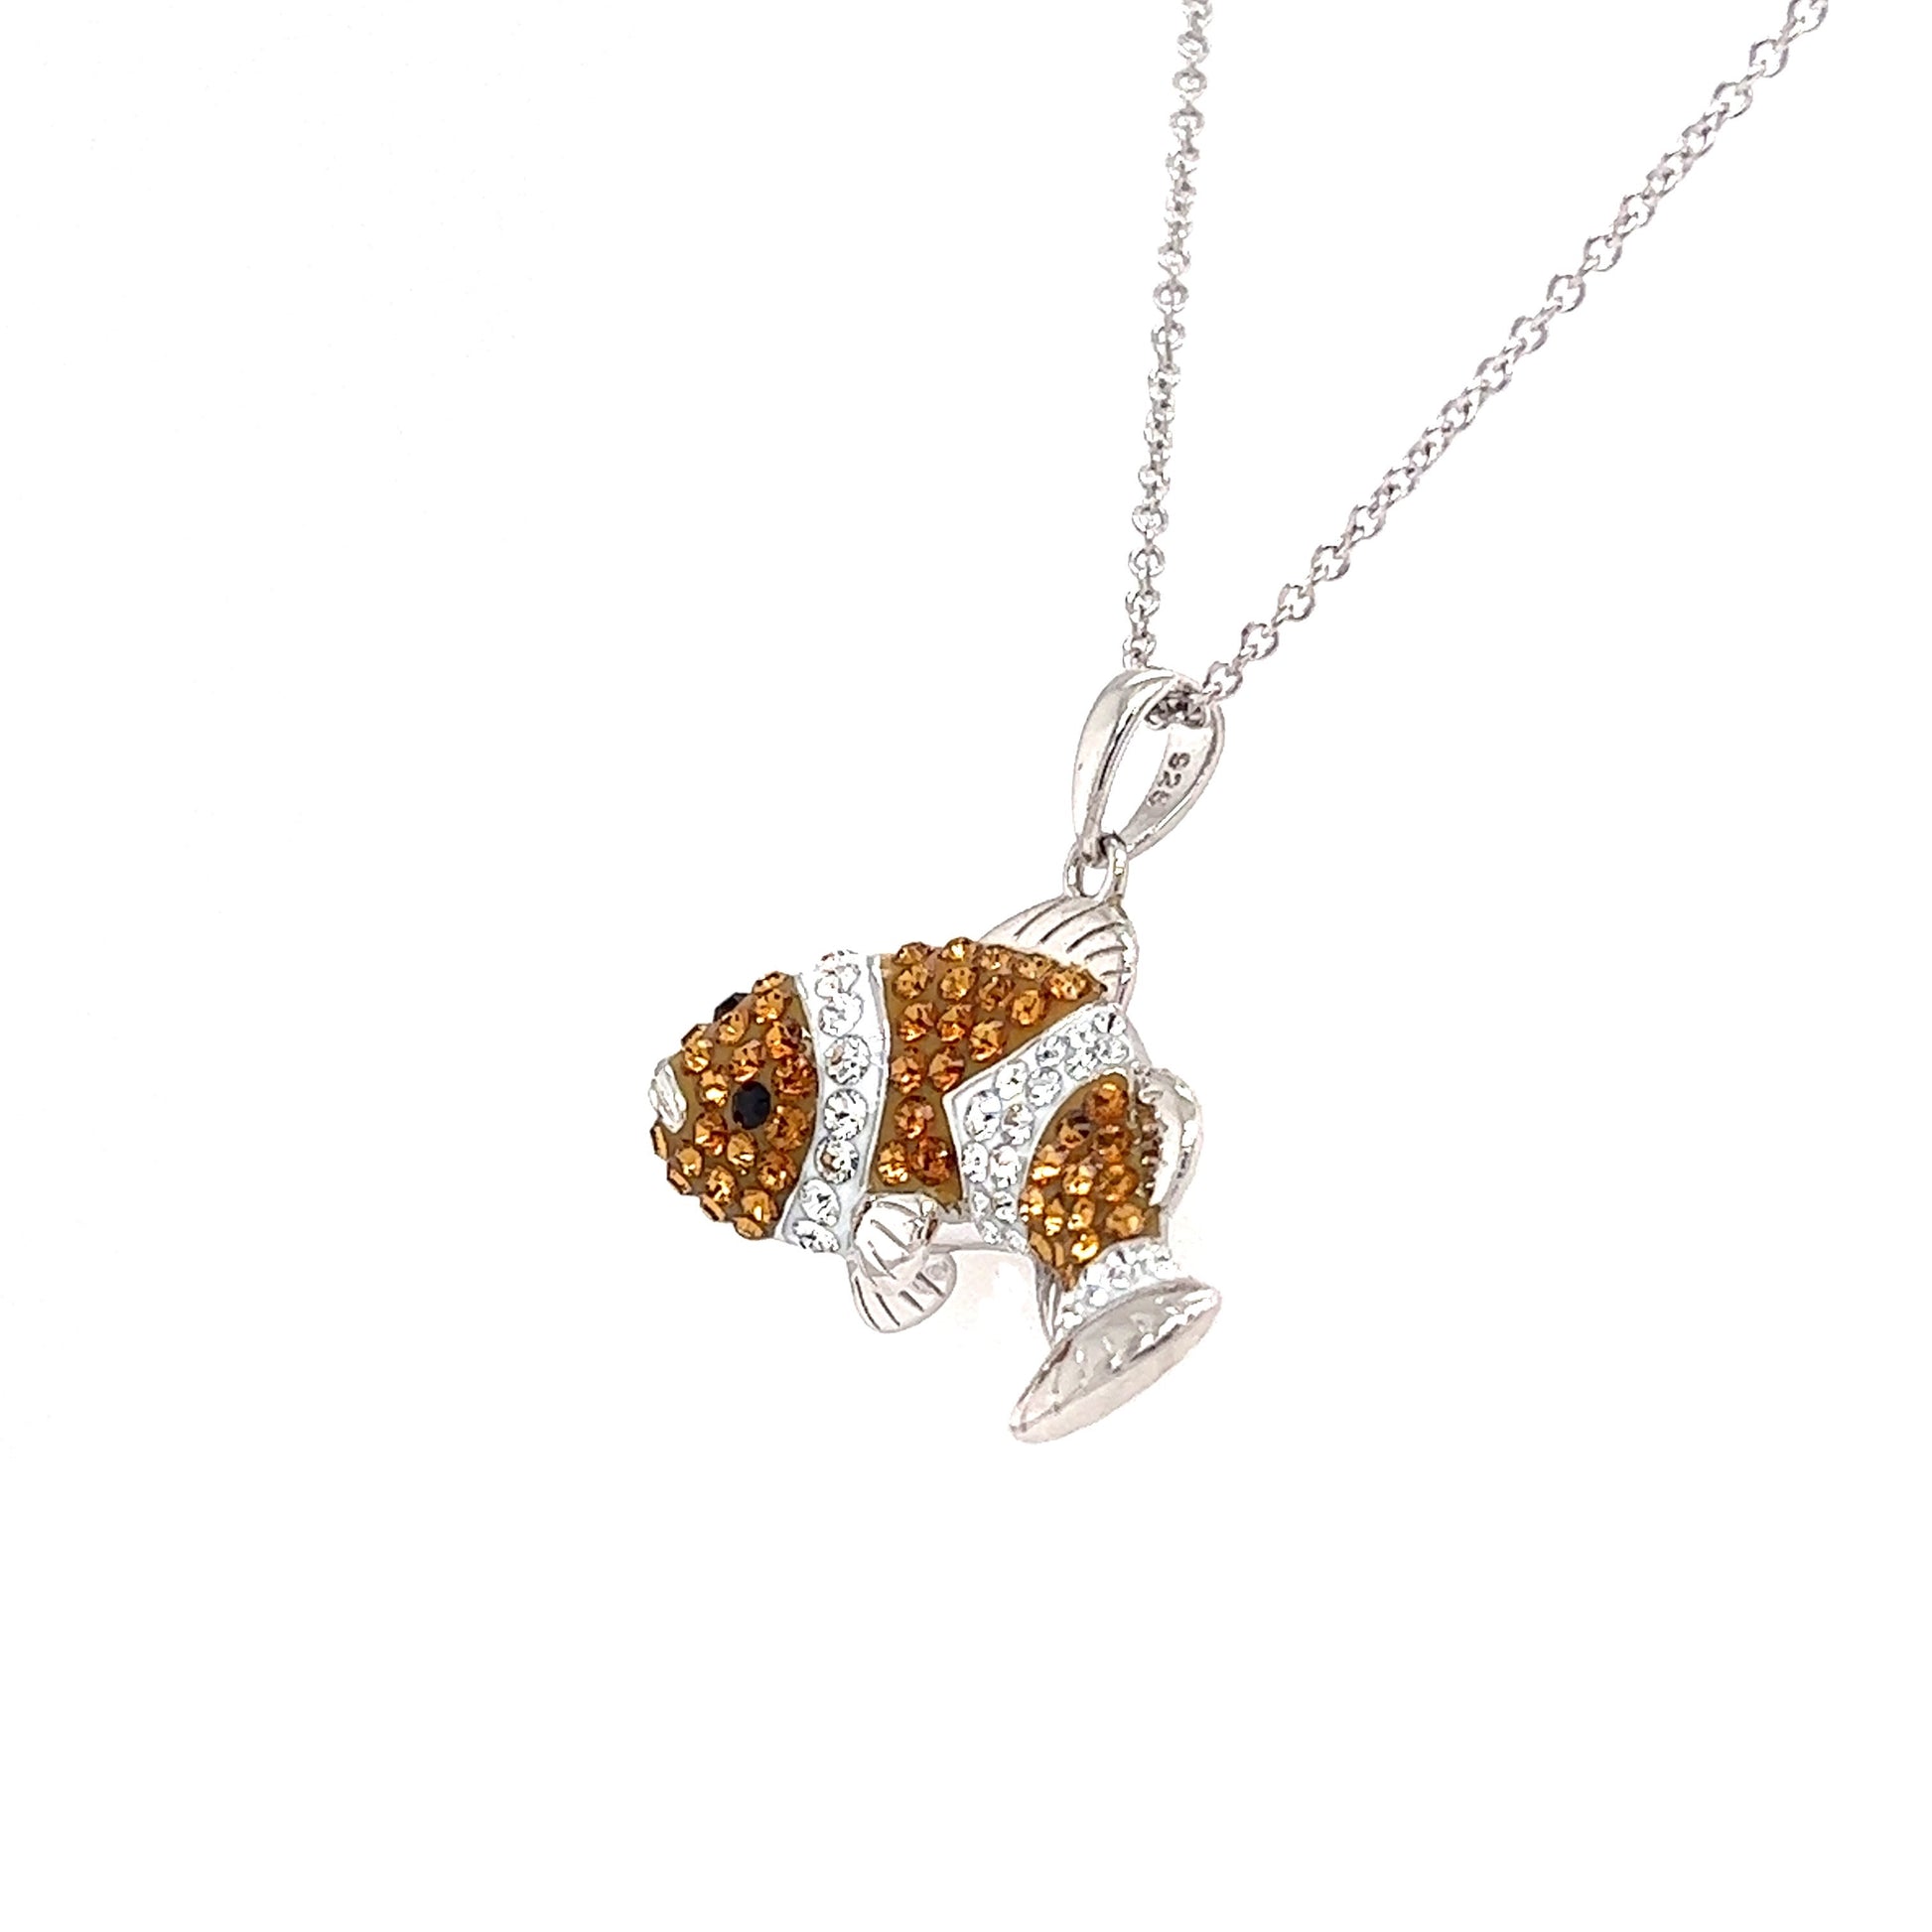 Clownfish Necklace with Orange and White Crystals in Sterling Silver Right Side View